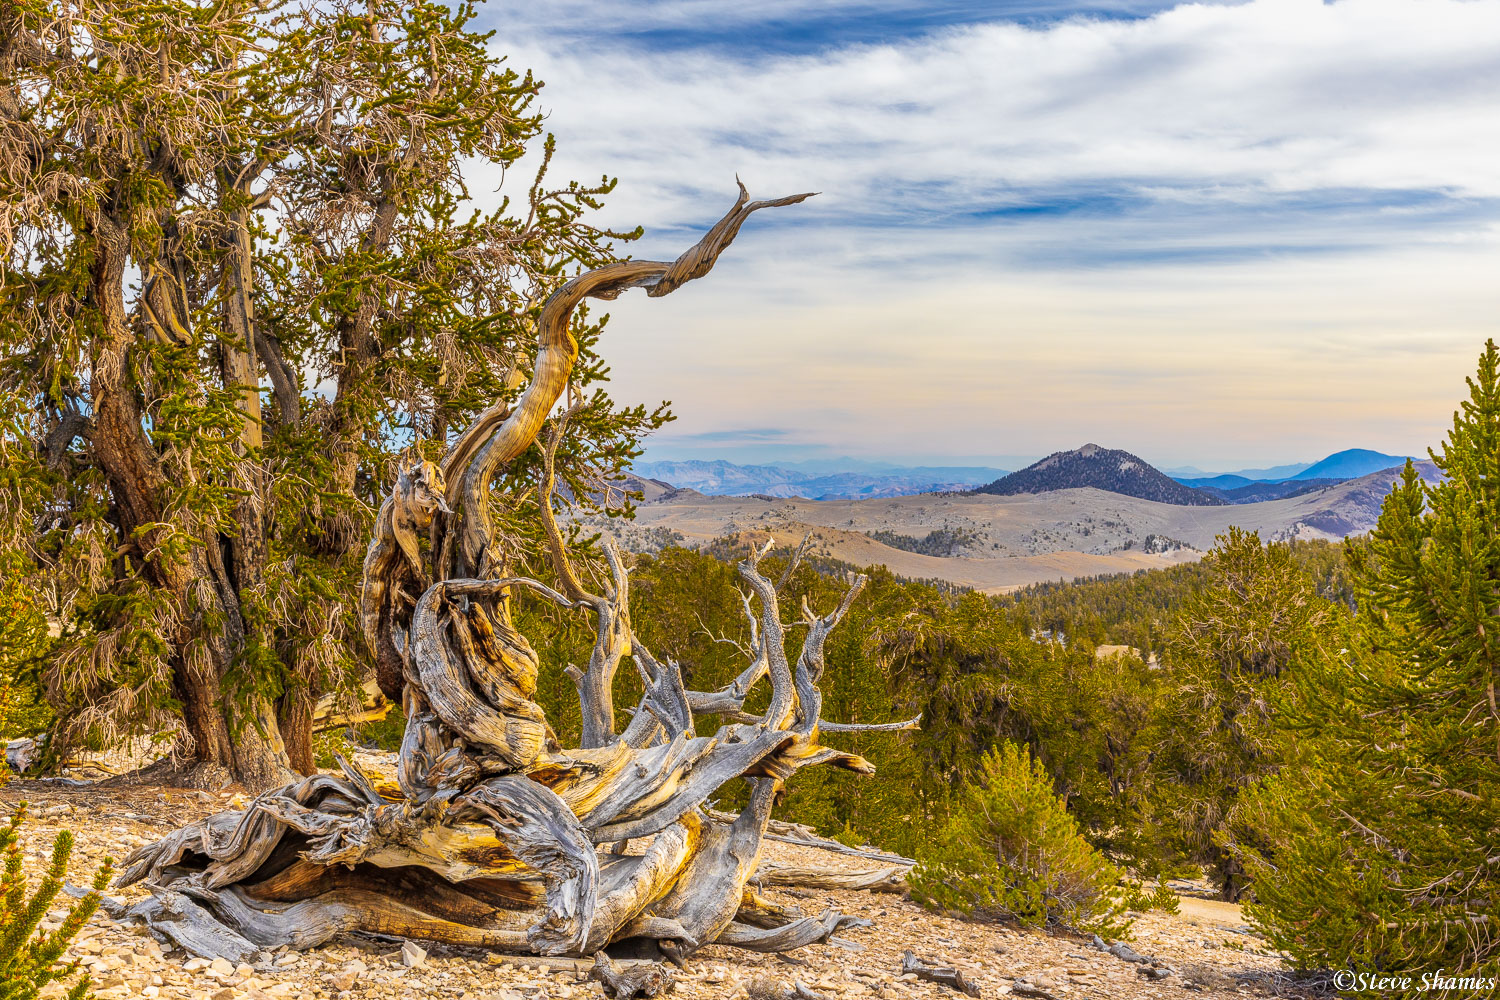 A distant view with a gnarly dead bristlecone pine in the front.